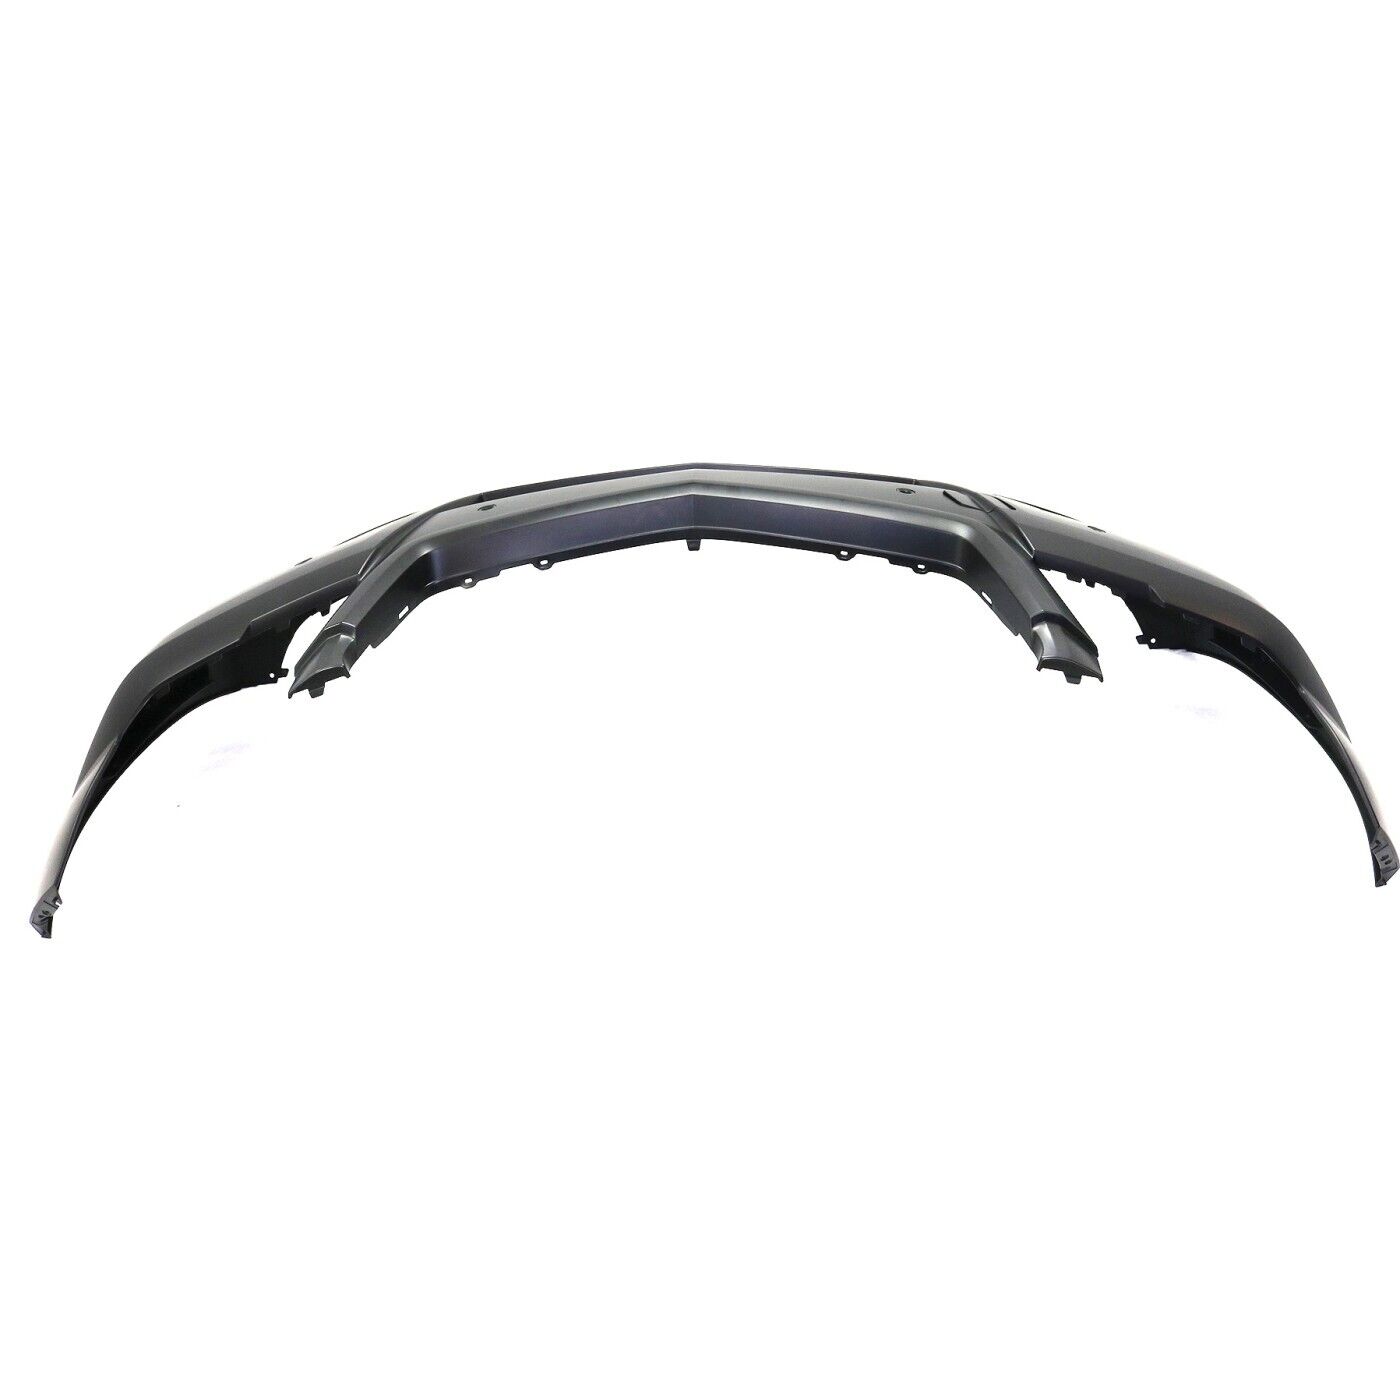 2010-2012 MERCEDES-BENZ GLK-CLASS; Front Bumper Cover; X204 w/o Off Road w/Park Sensor w/o HL Washer Painted to Match